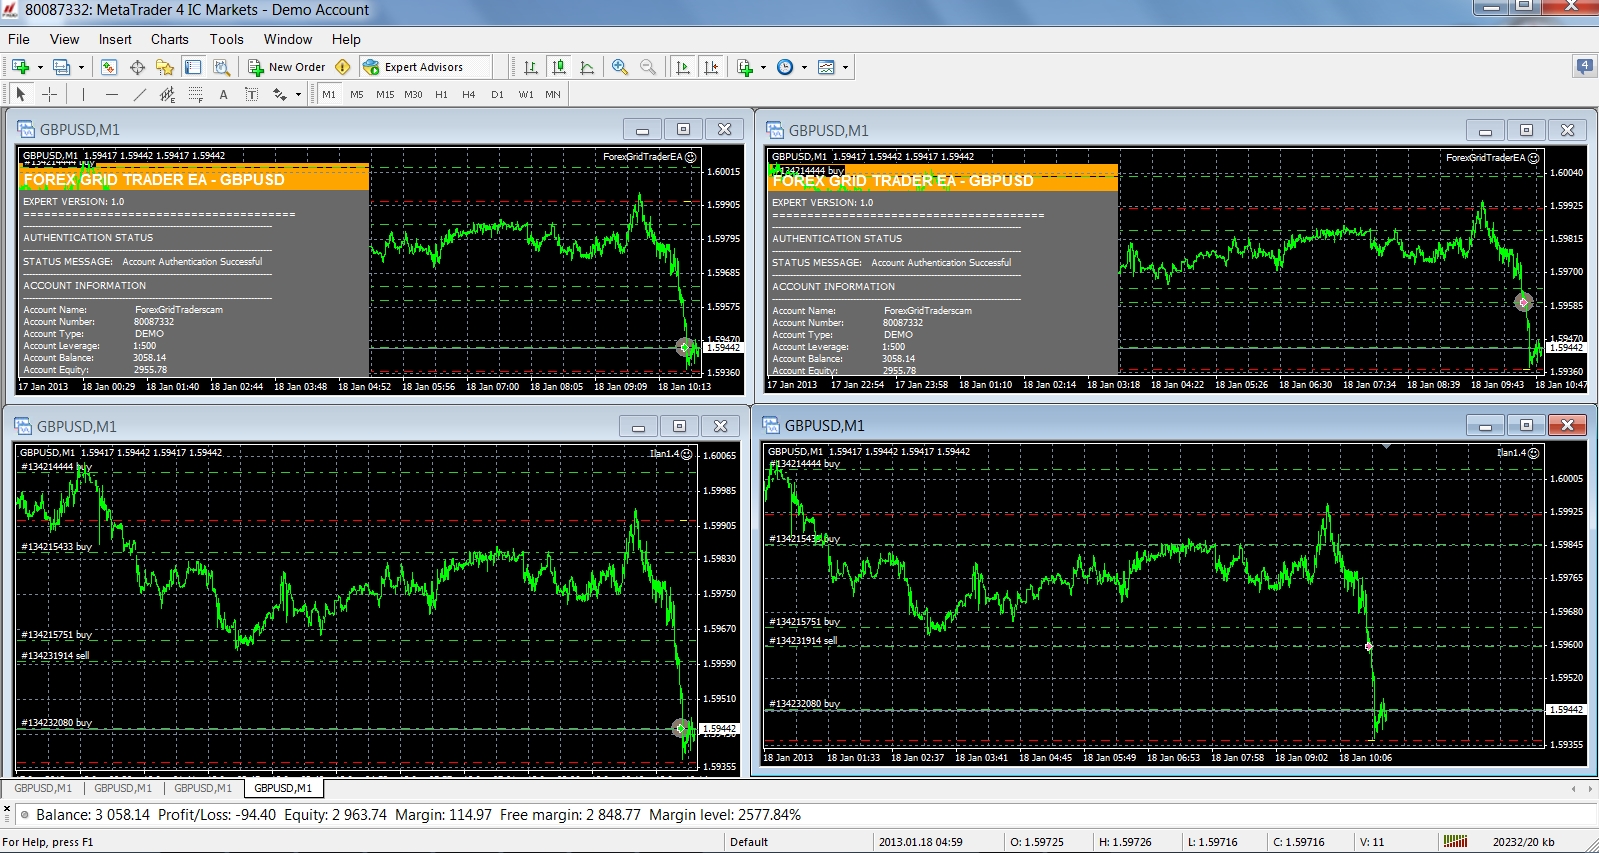 Forex grid trading